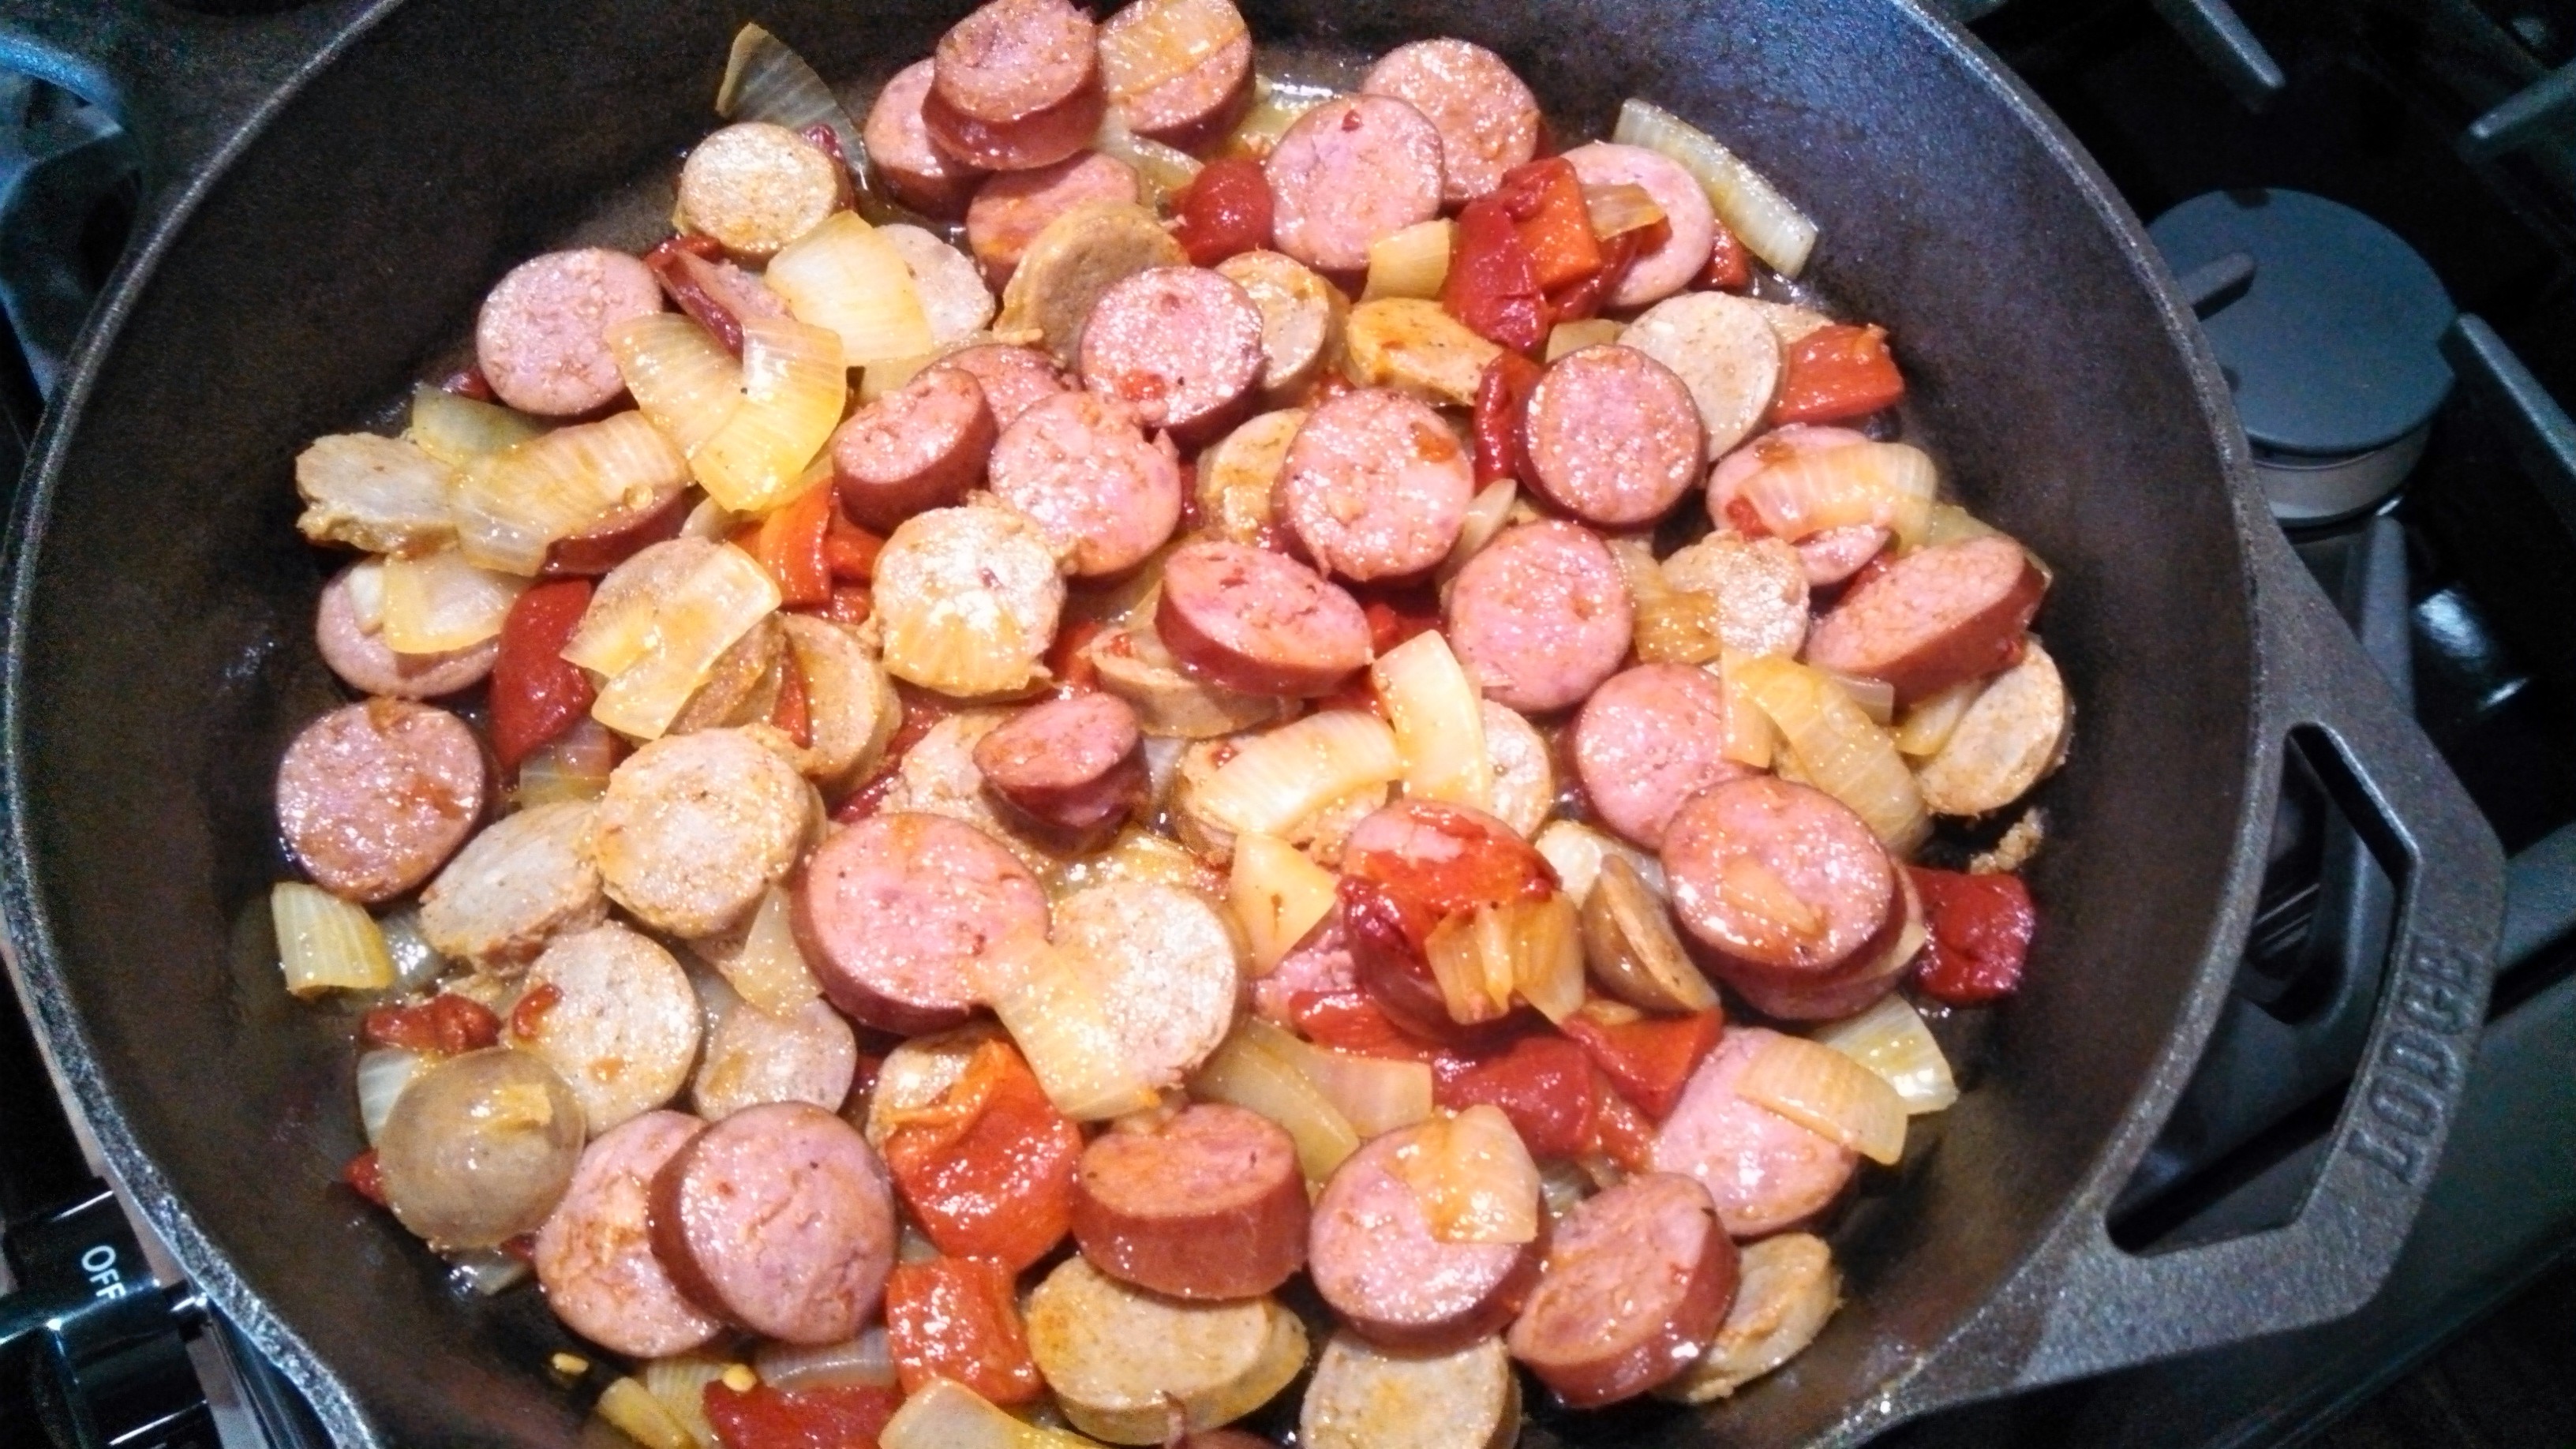 Sausage with vidalia onions and fire roasted peppers